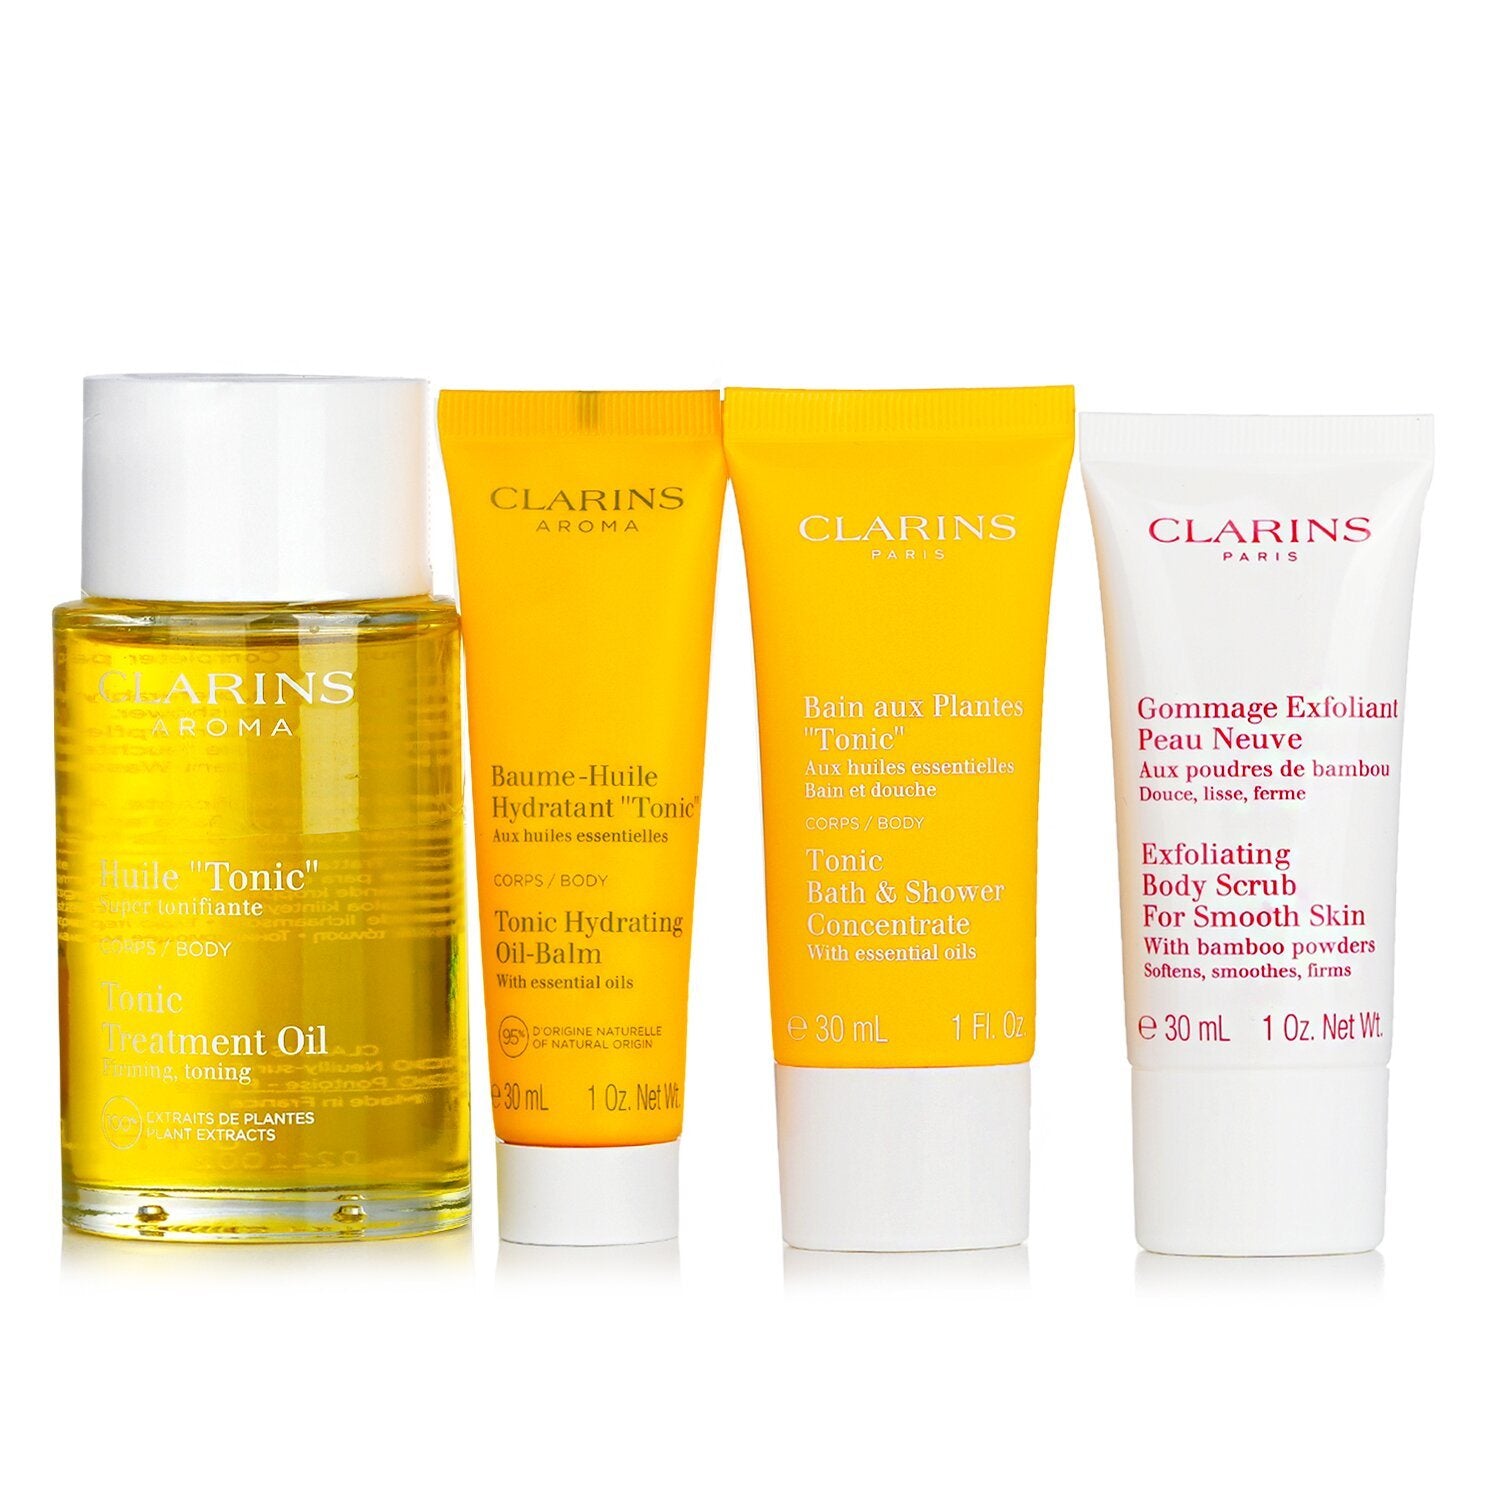 CLARINS - SPA At Home Set: Body Oil 100ml+Shower Concentrate 30ml+Baume Huile Oil Balm 30ml+Body Scrub 30ml+1 Bag 80100879 / 180712 4pcs+1bag - lolaluxeshop